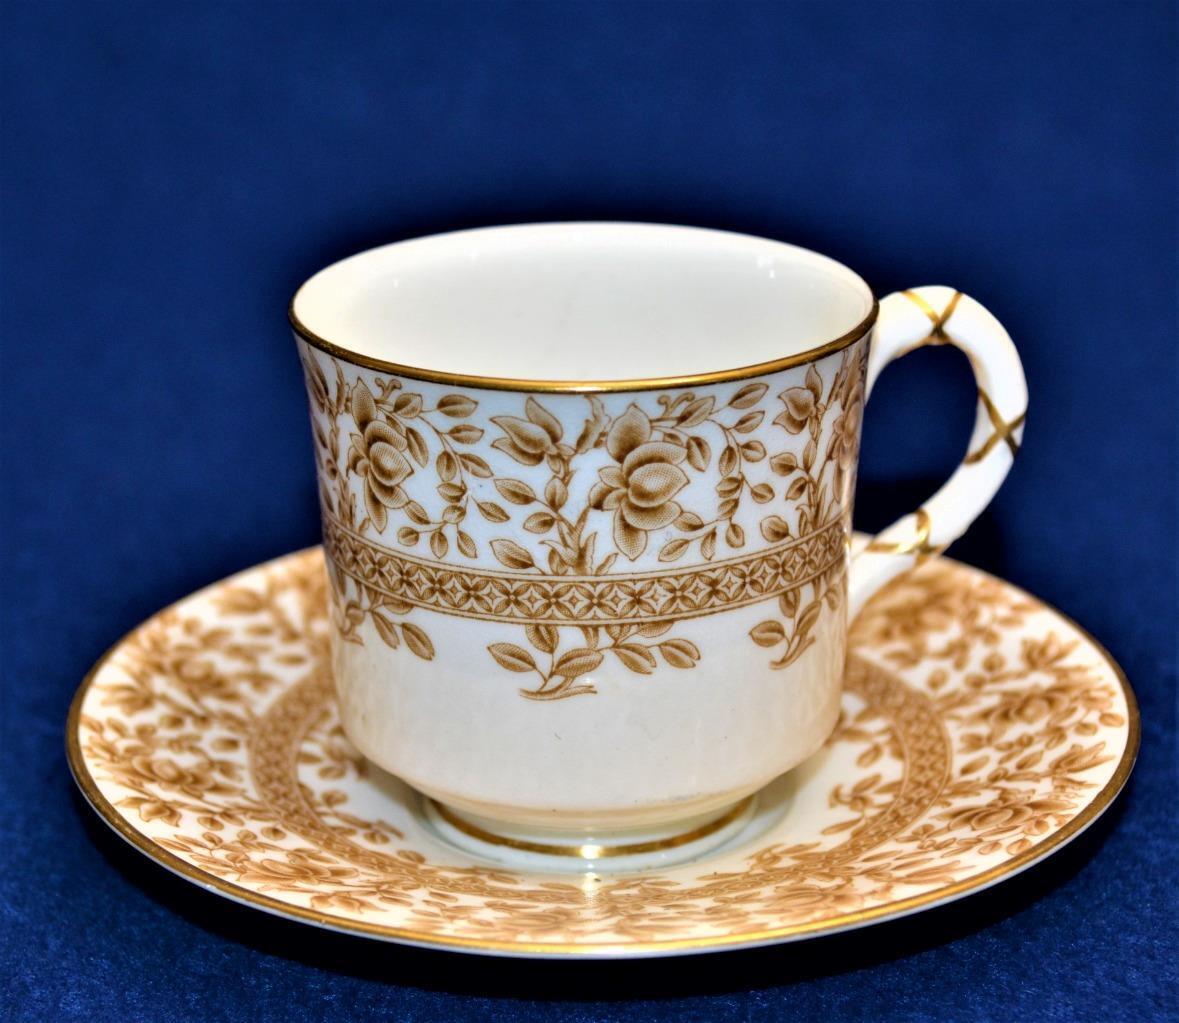 Atq 1870s ROYAL WORCESTER for ABRAM FRENCH Brown #3842 Set Demitasse Cup Saucer